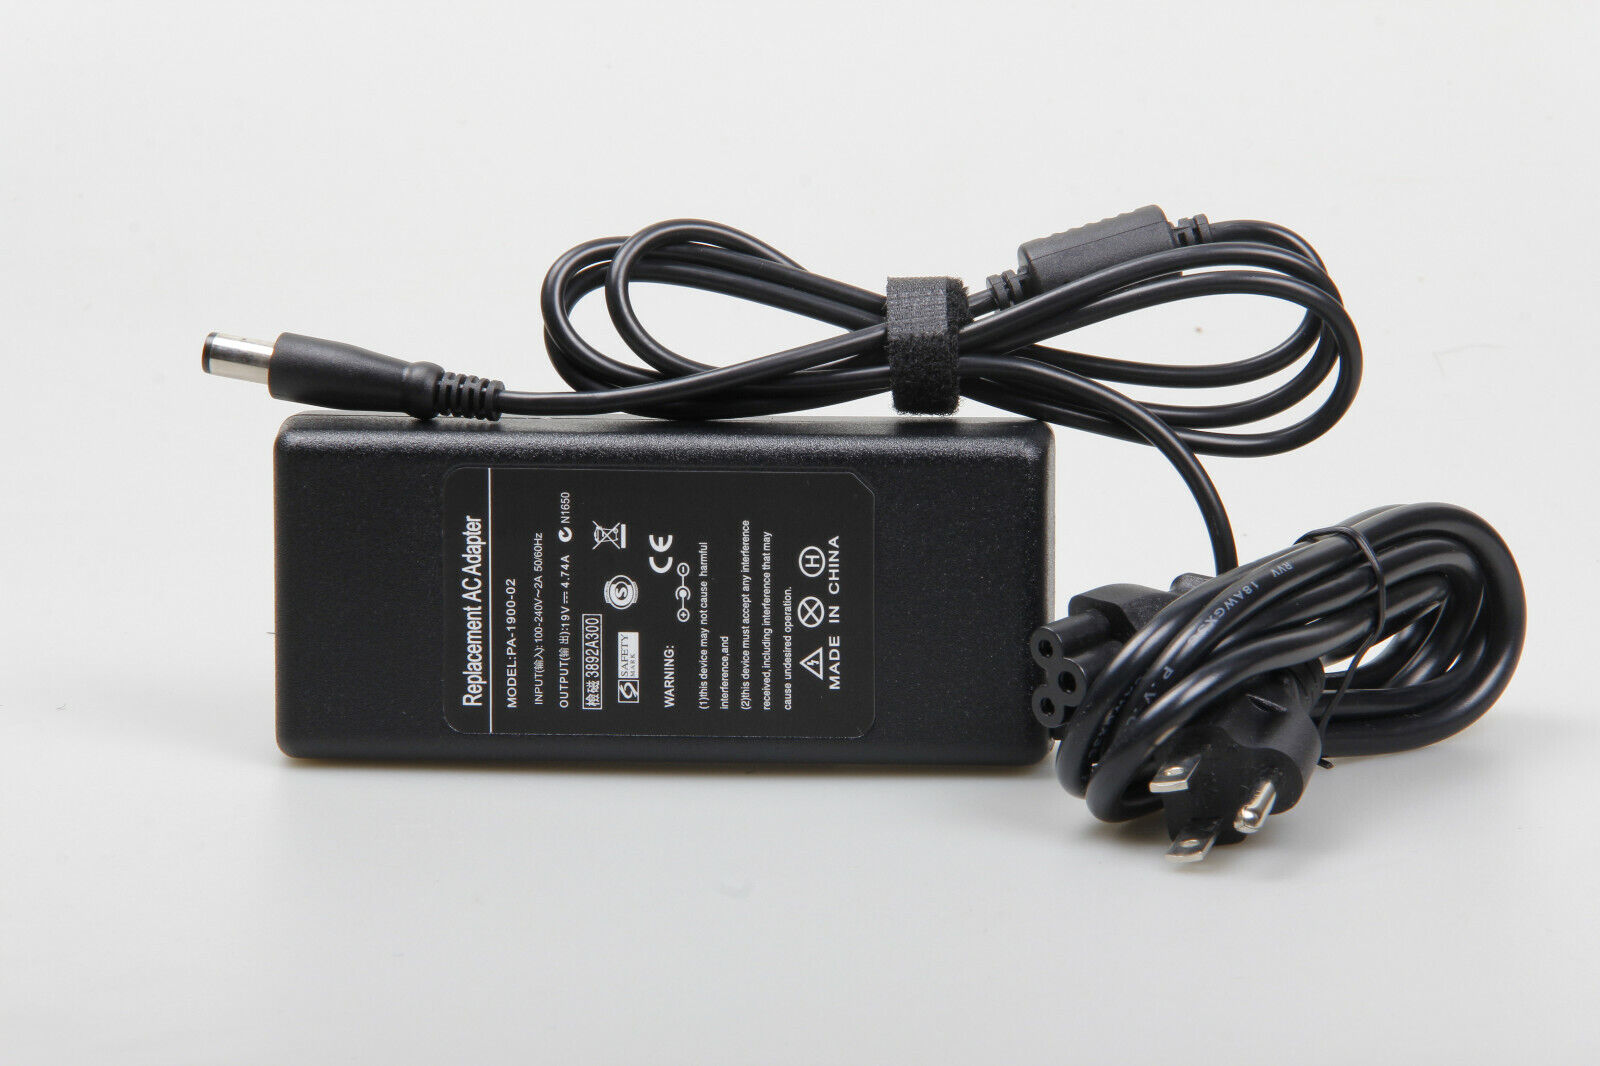 AC Power Adapter For HP Pavilion 23-q120 23-q127c 23-q128 All-in-One Desktop PC